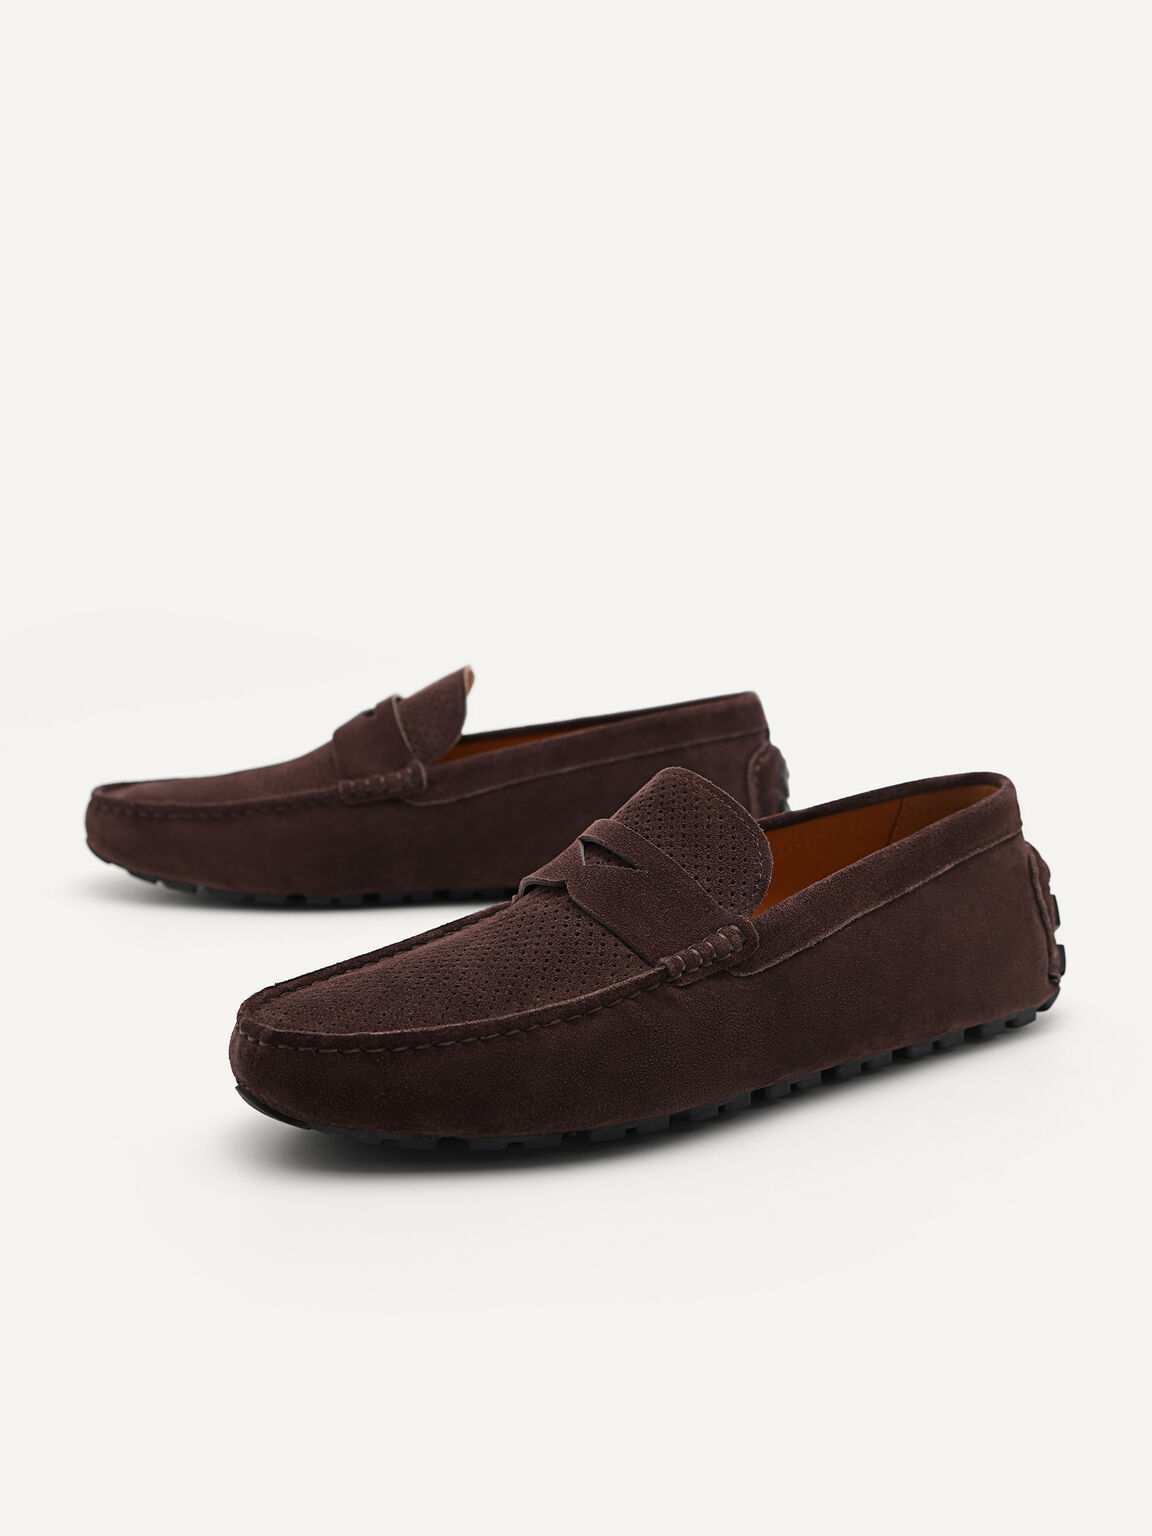 Leather Moccasin, Dark Brown